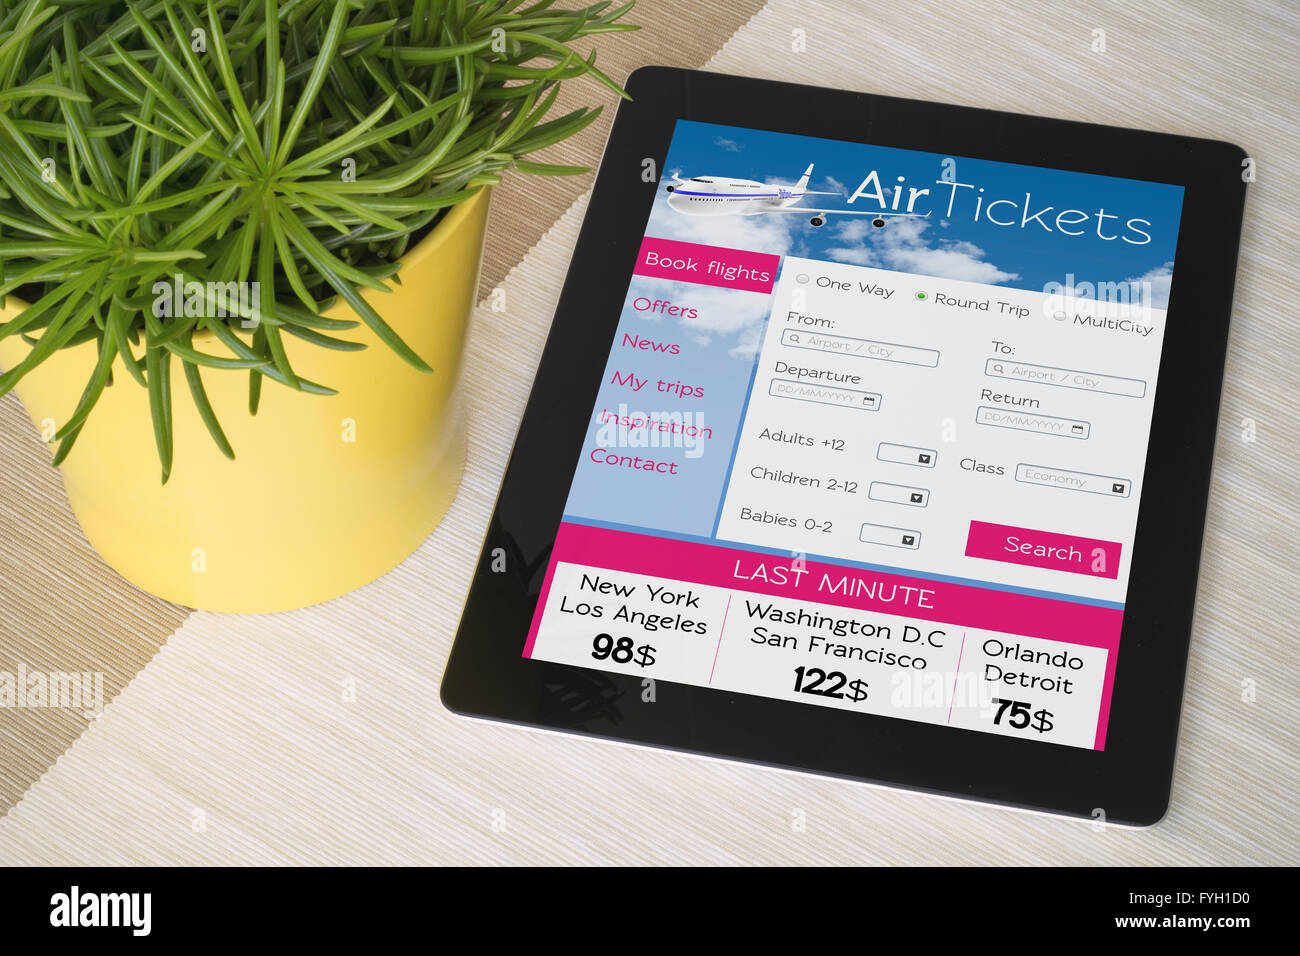 ticket flight web on tablet. All screen graphics are made up Stock Photo